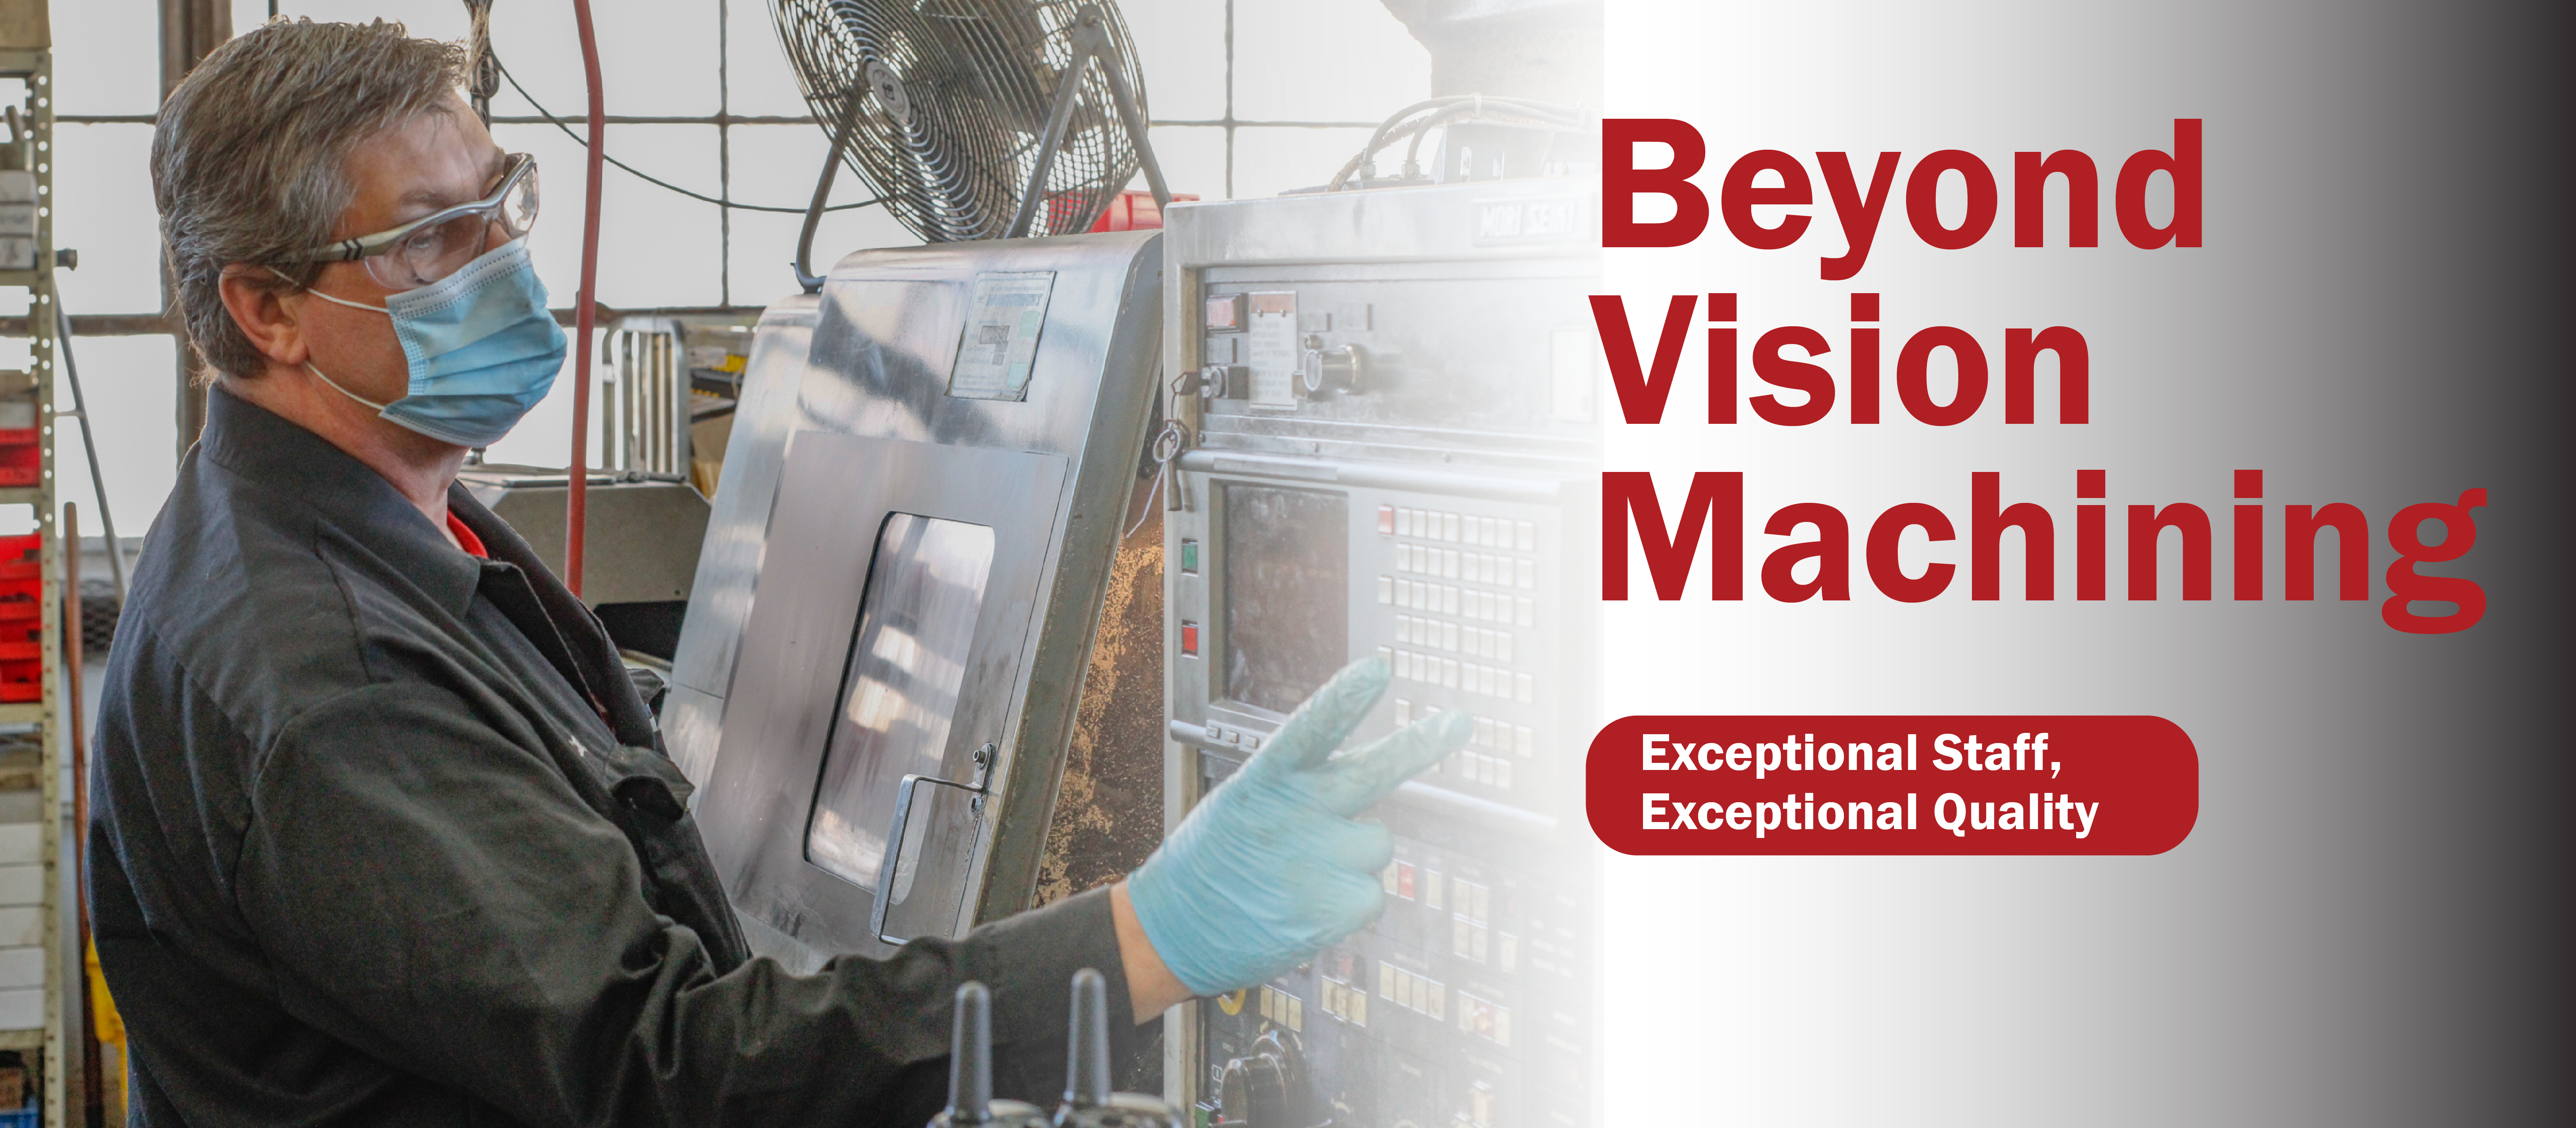 Picture of Beyond Vision employee operating a machine. Text says 